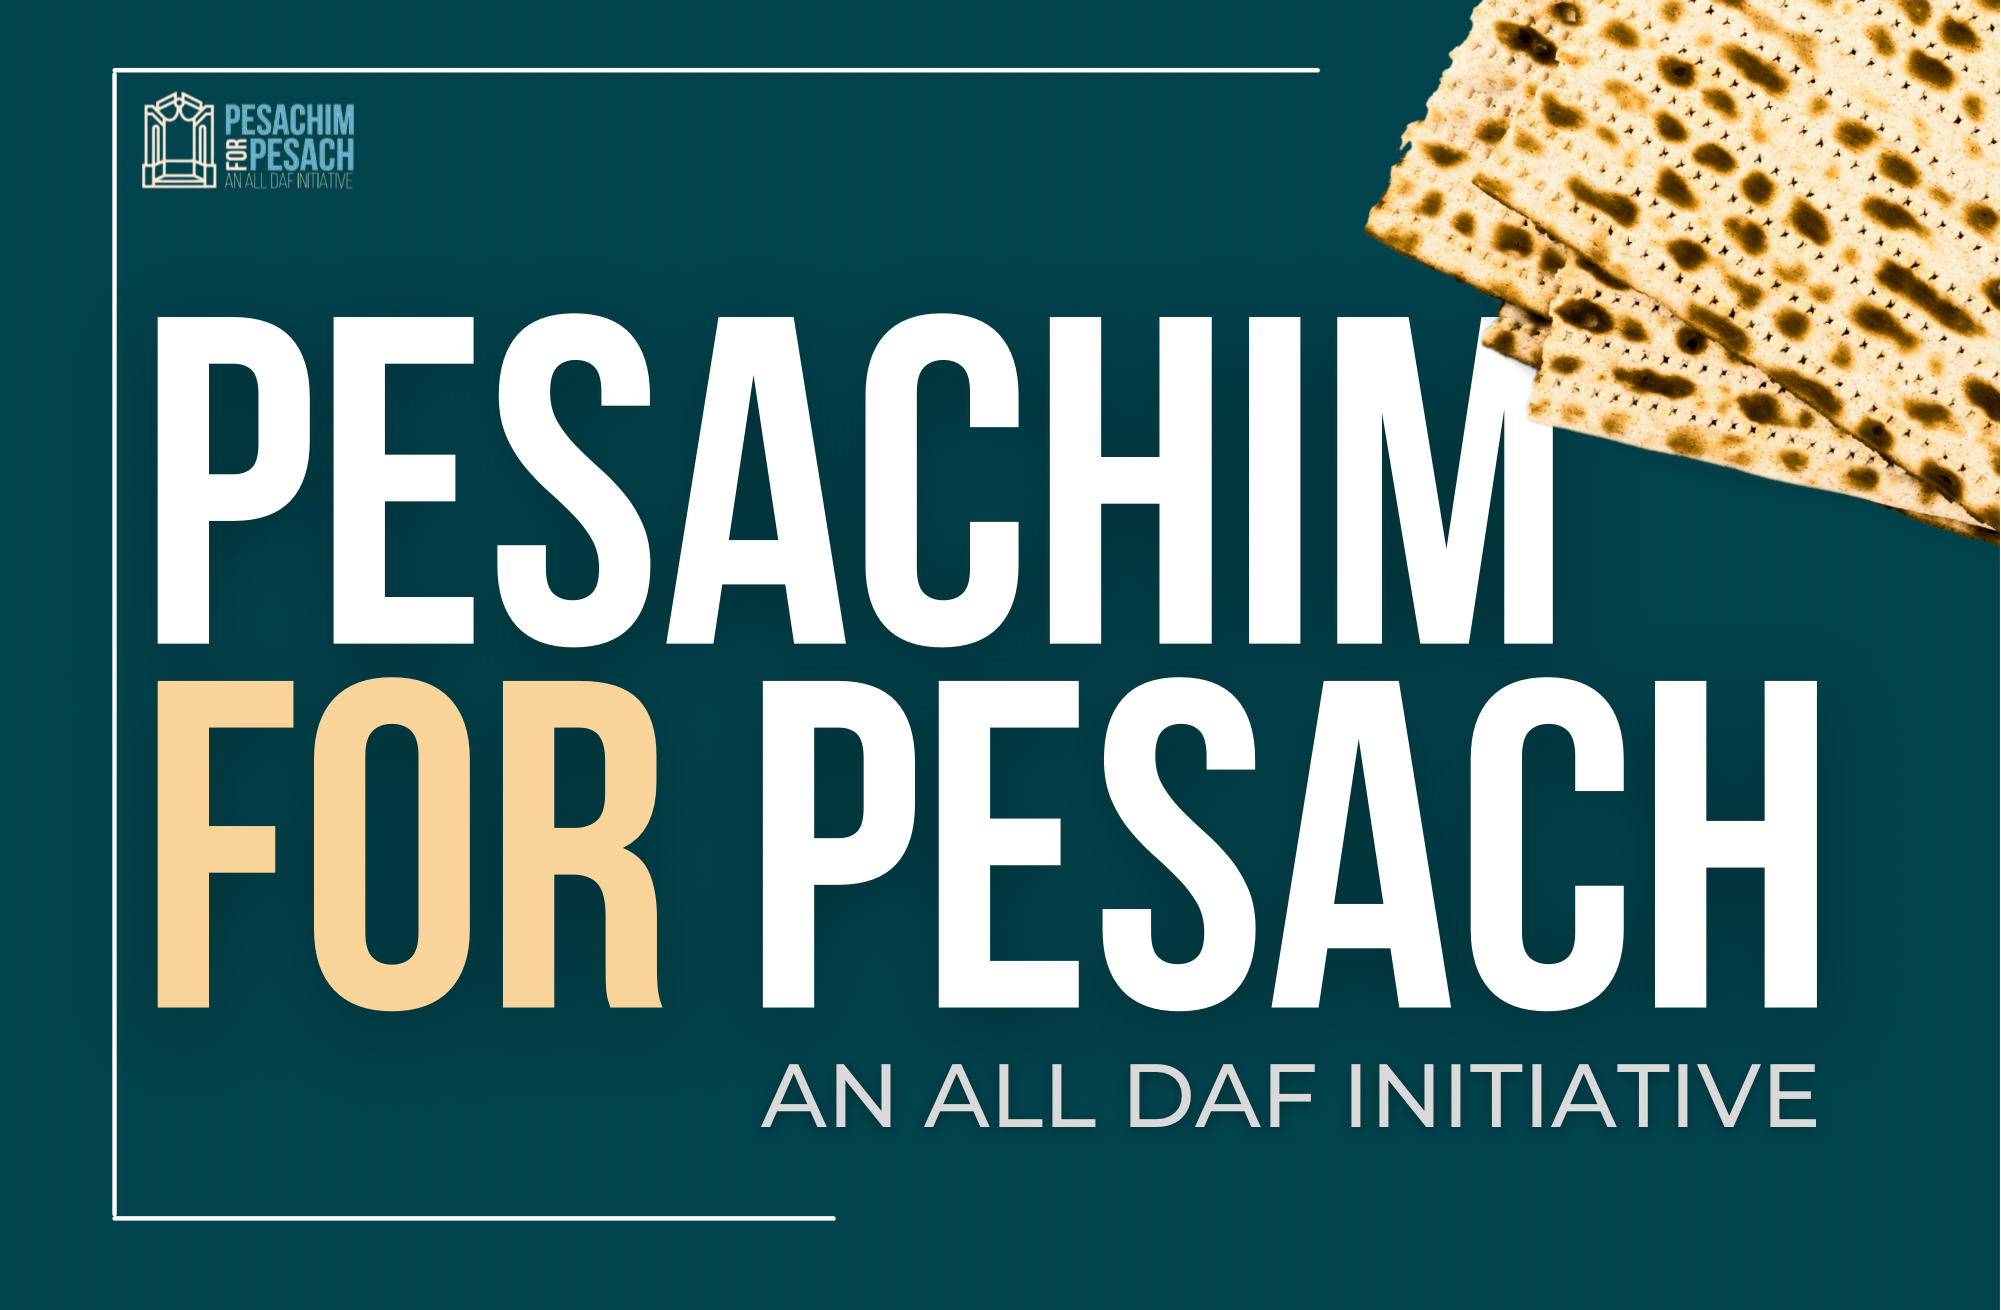 Hours of Educational Pesach Content 